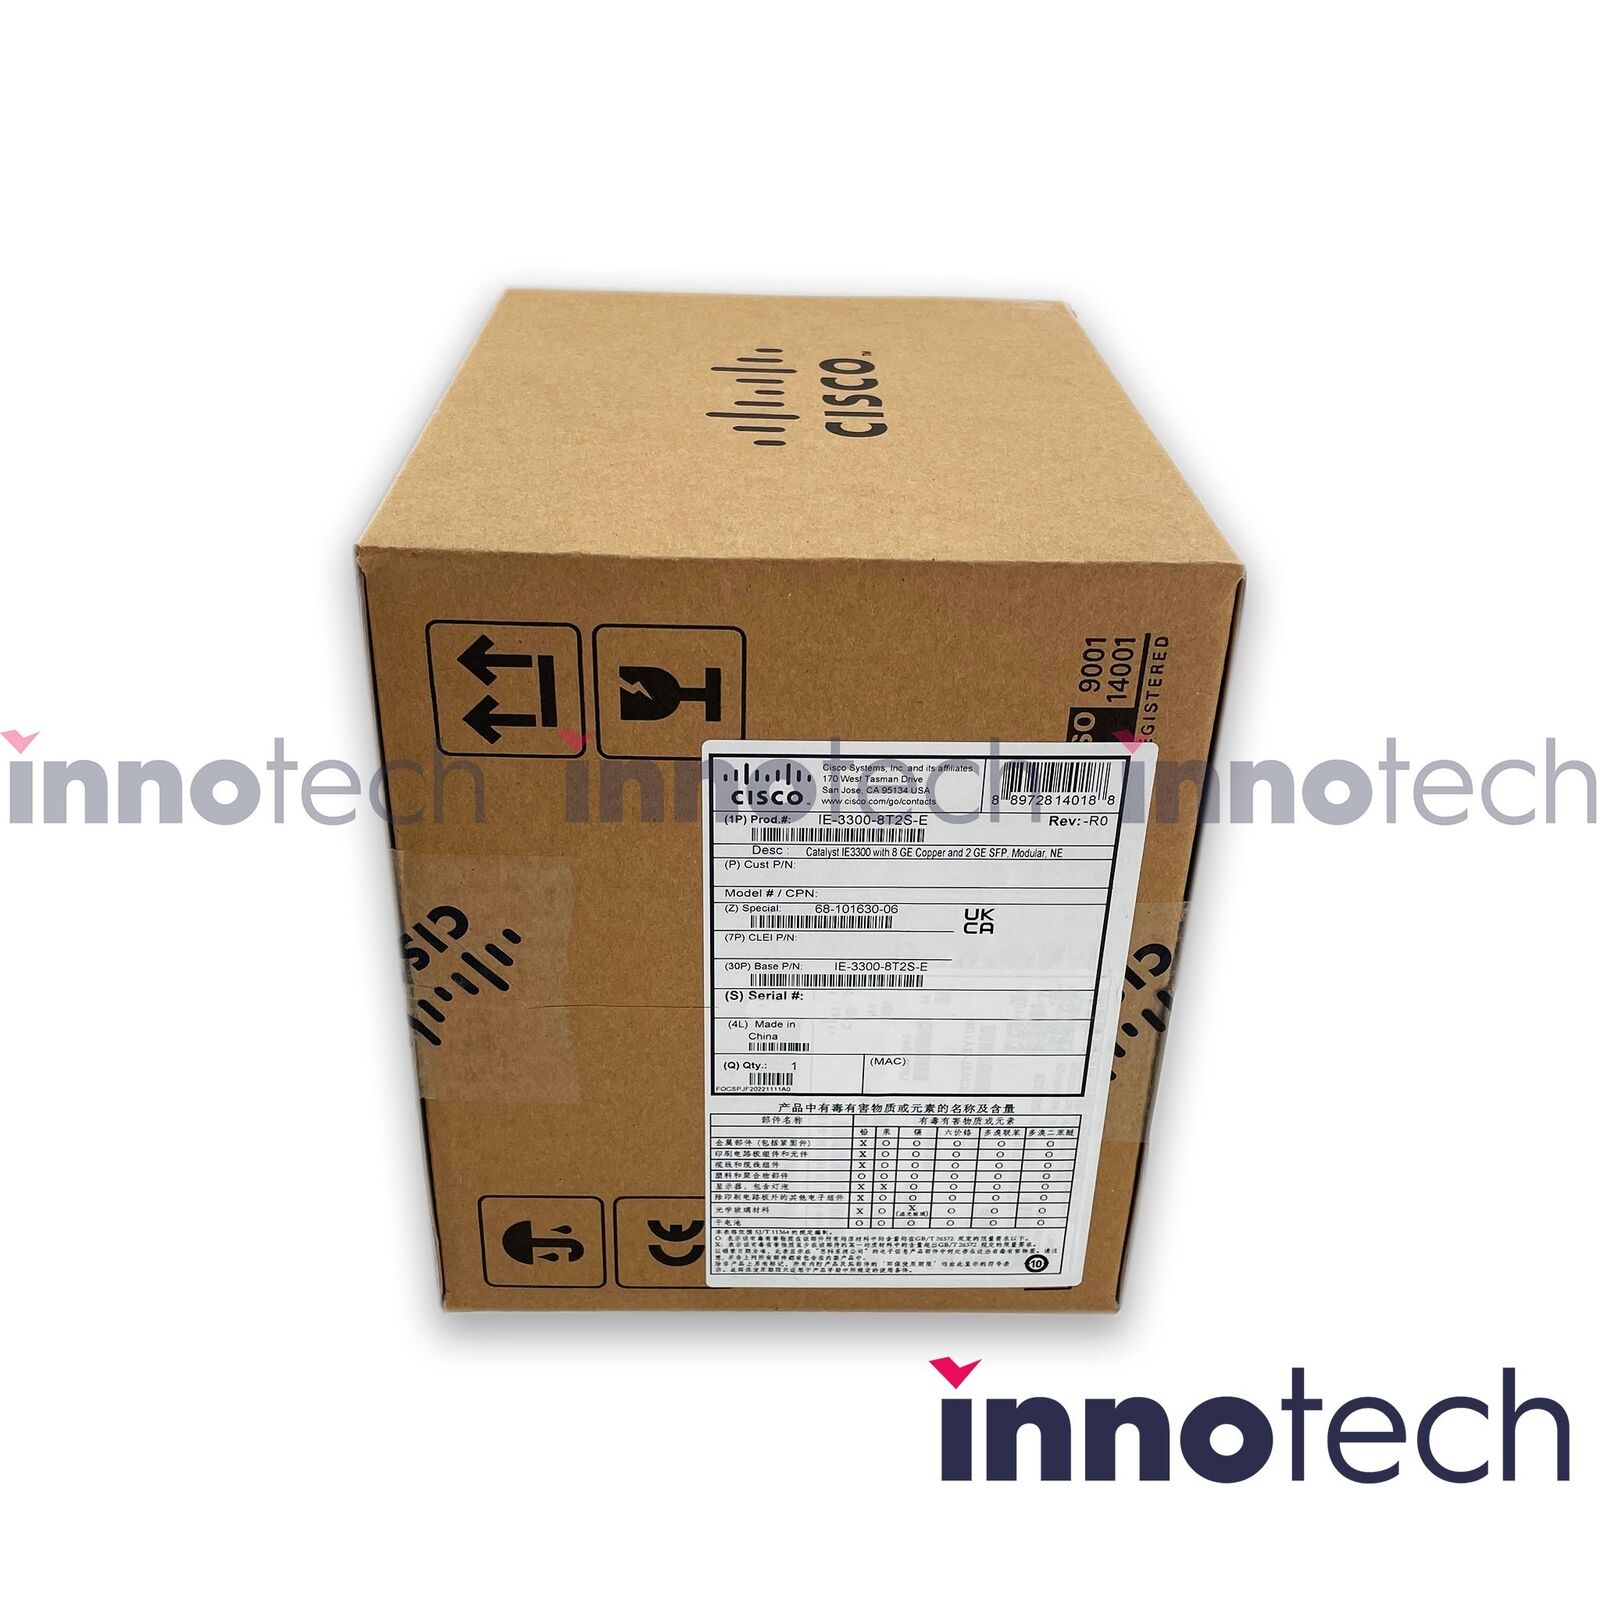 Cisco IE-3300-8T2S-E Industrial Ethernet Switch New Sealed